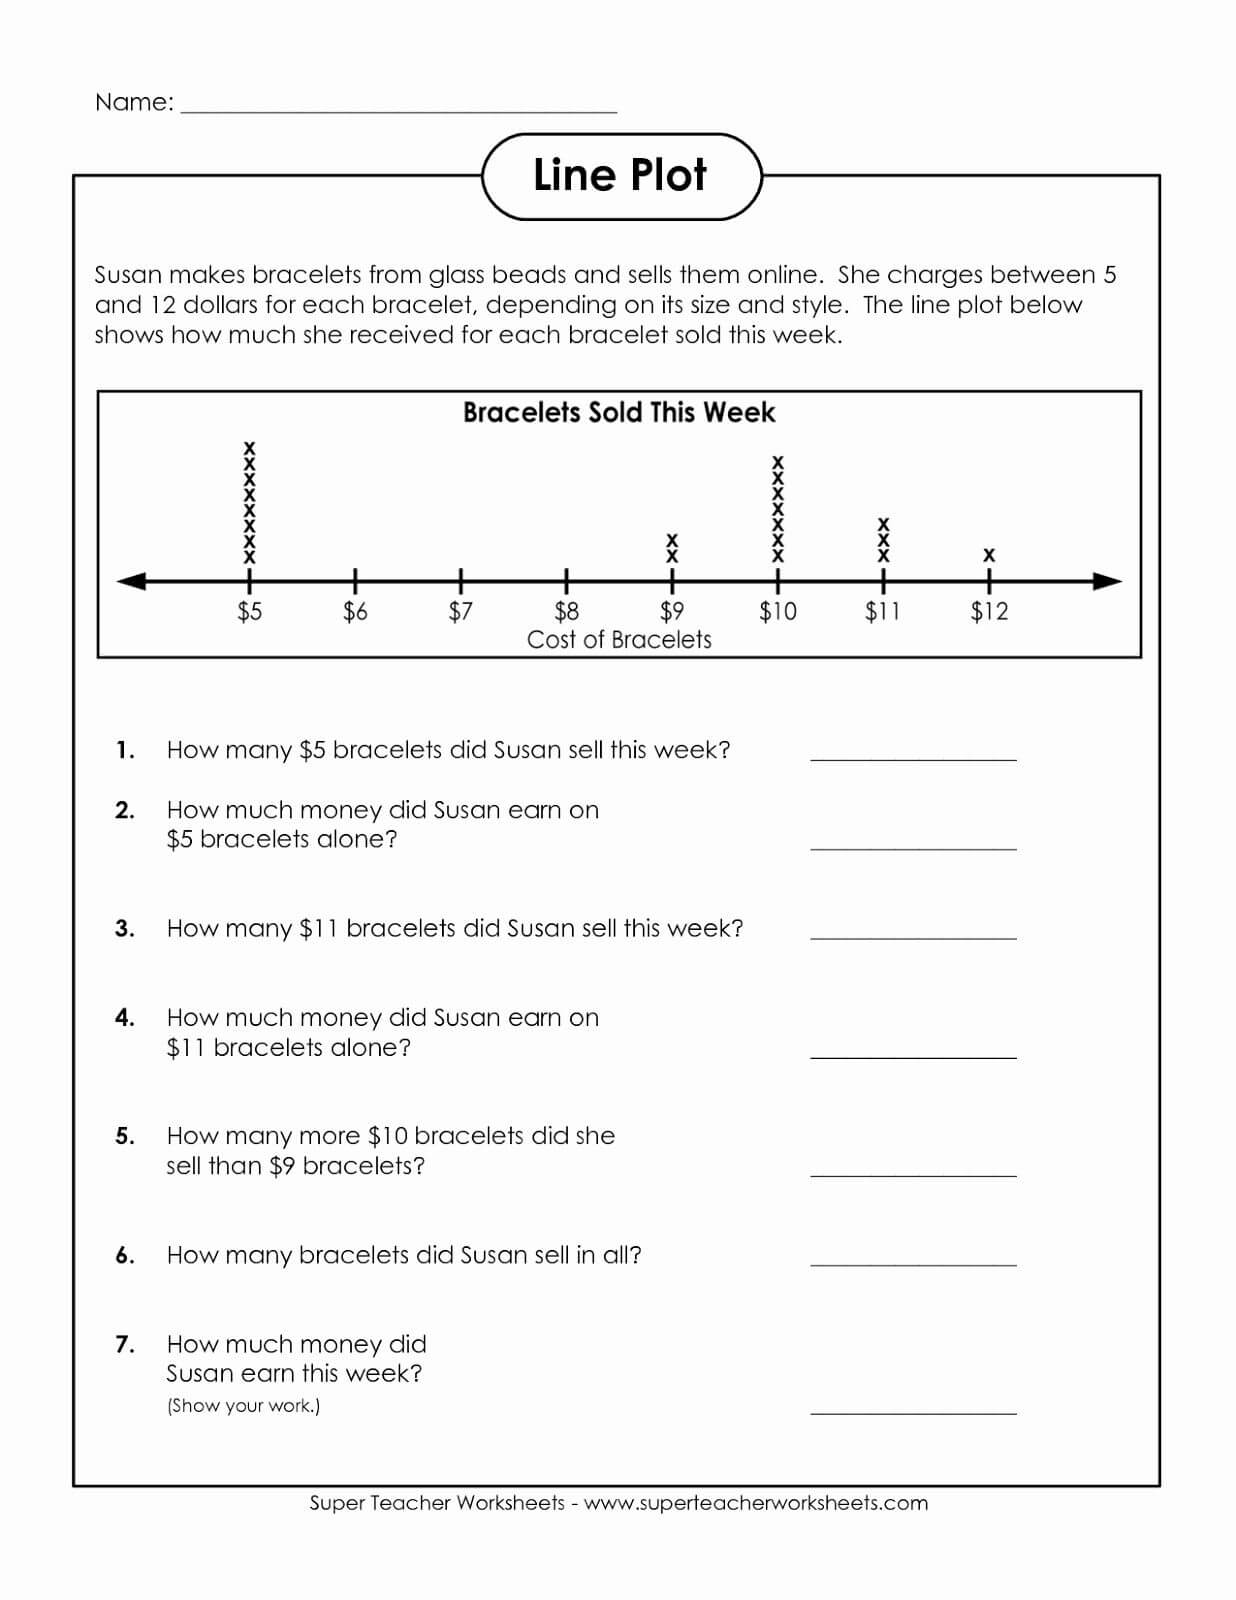 Stem And Leaf Plot Worksheet Answers | Briefencounters With Blank Stem And Leaf Plot Template